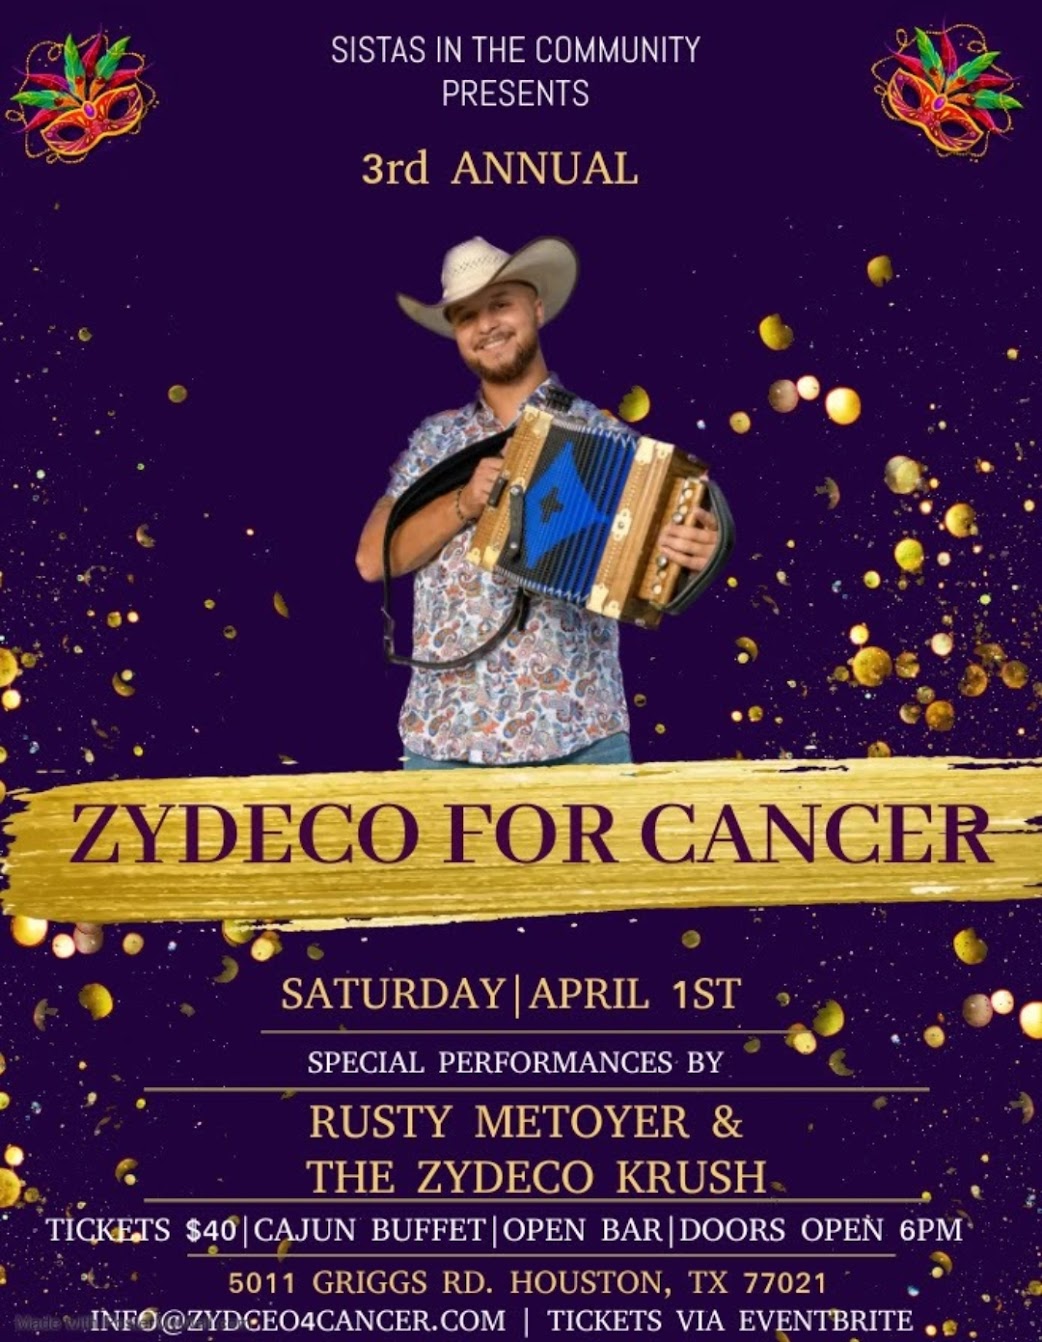 Sistas In The Community Presents - 3rd Annual Zydeco For Cancer